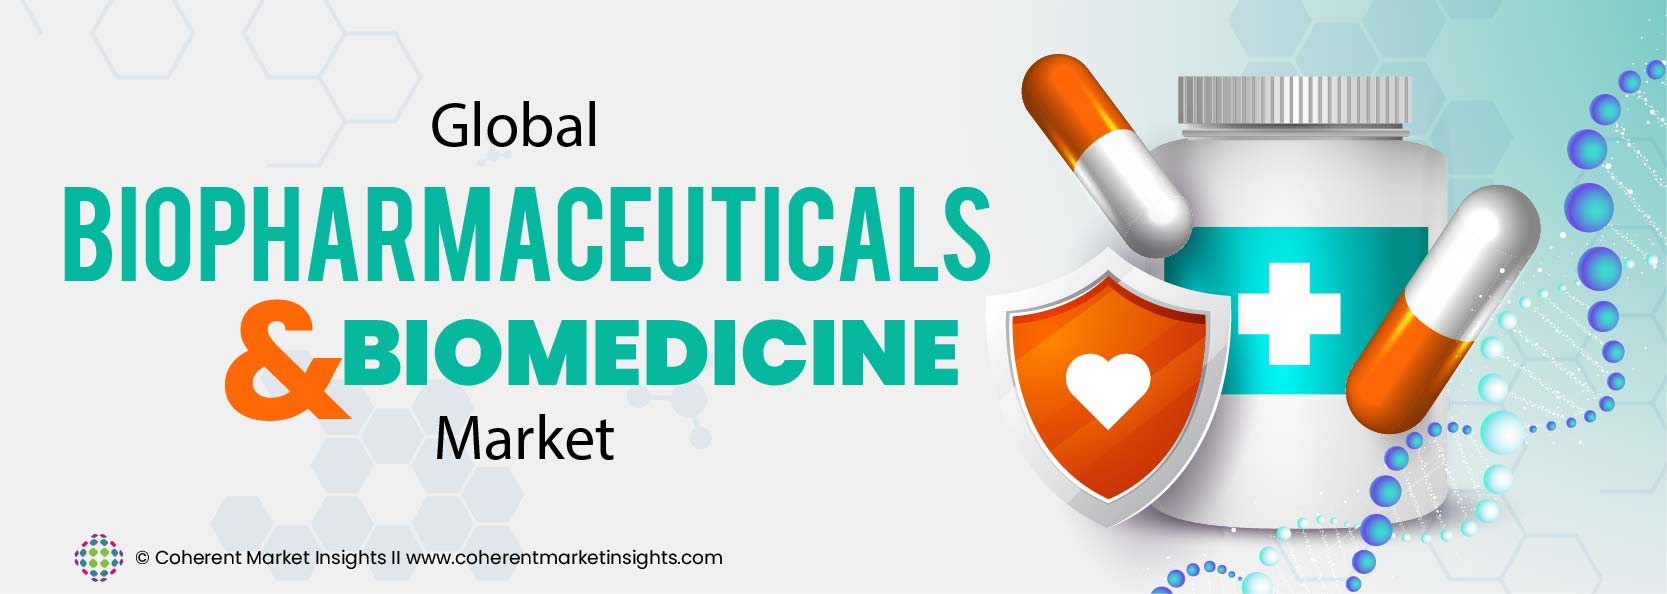 Top Companies - Biopharmaceutical And Biomedicine Industry